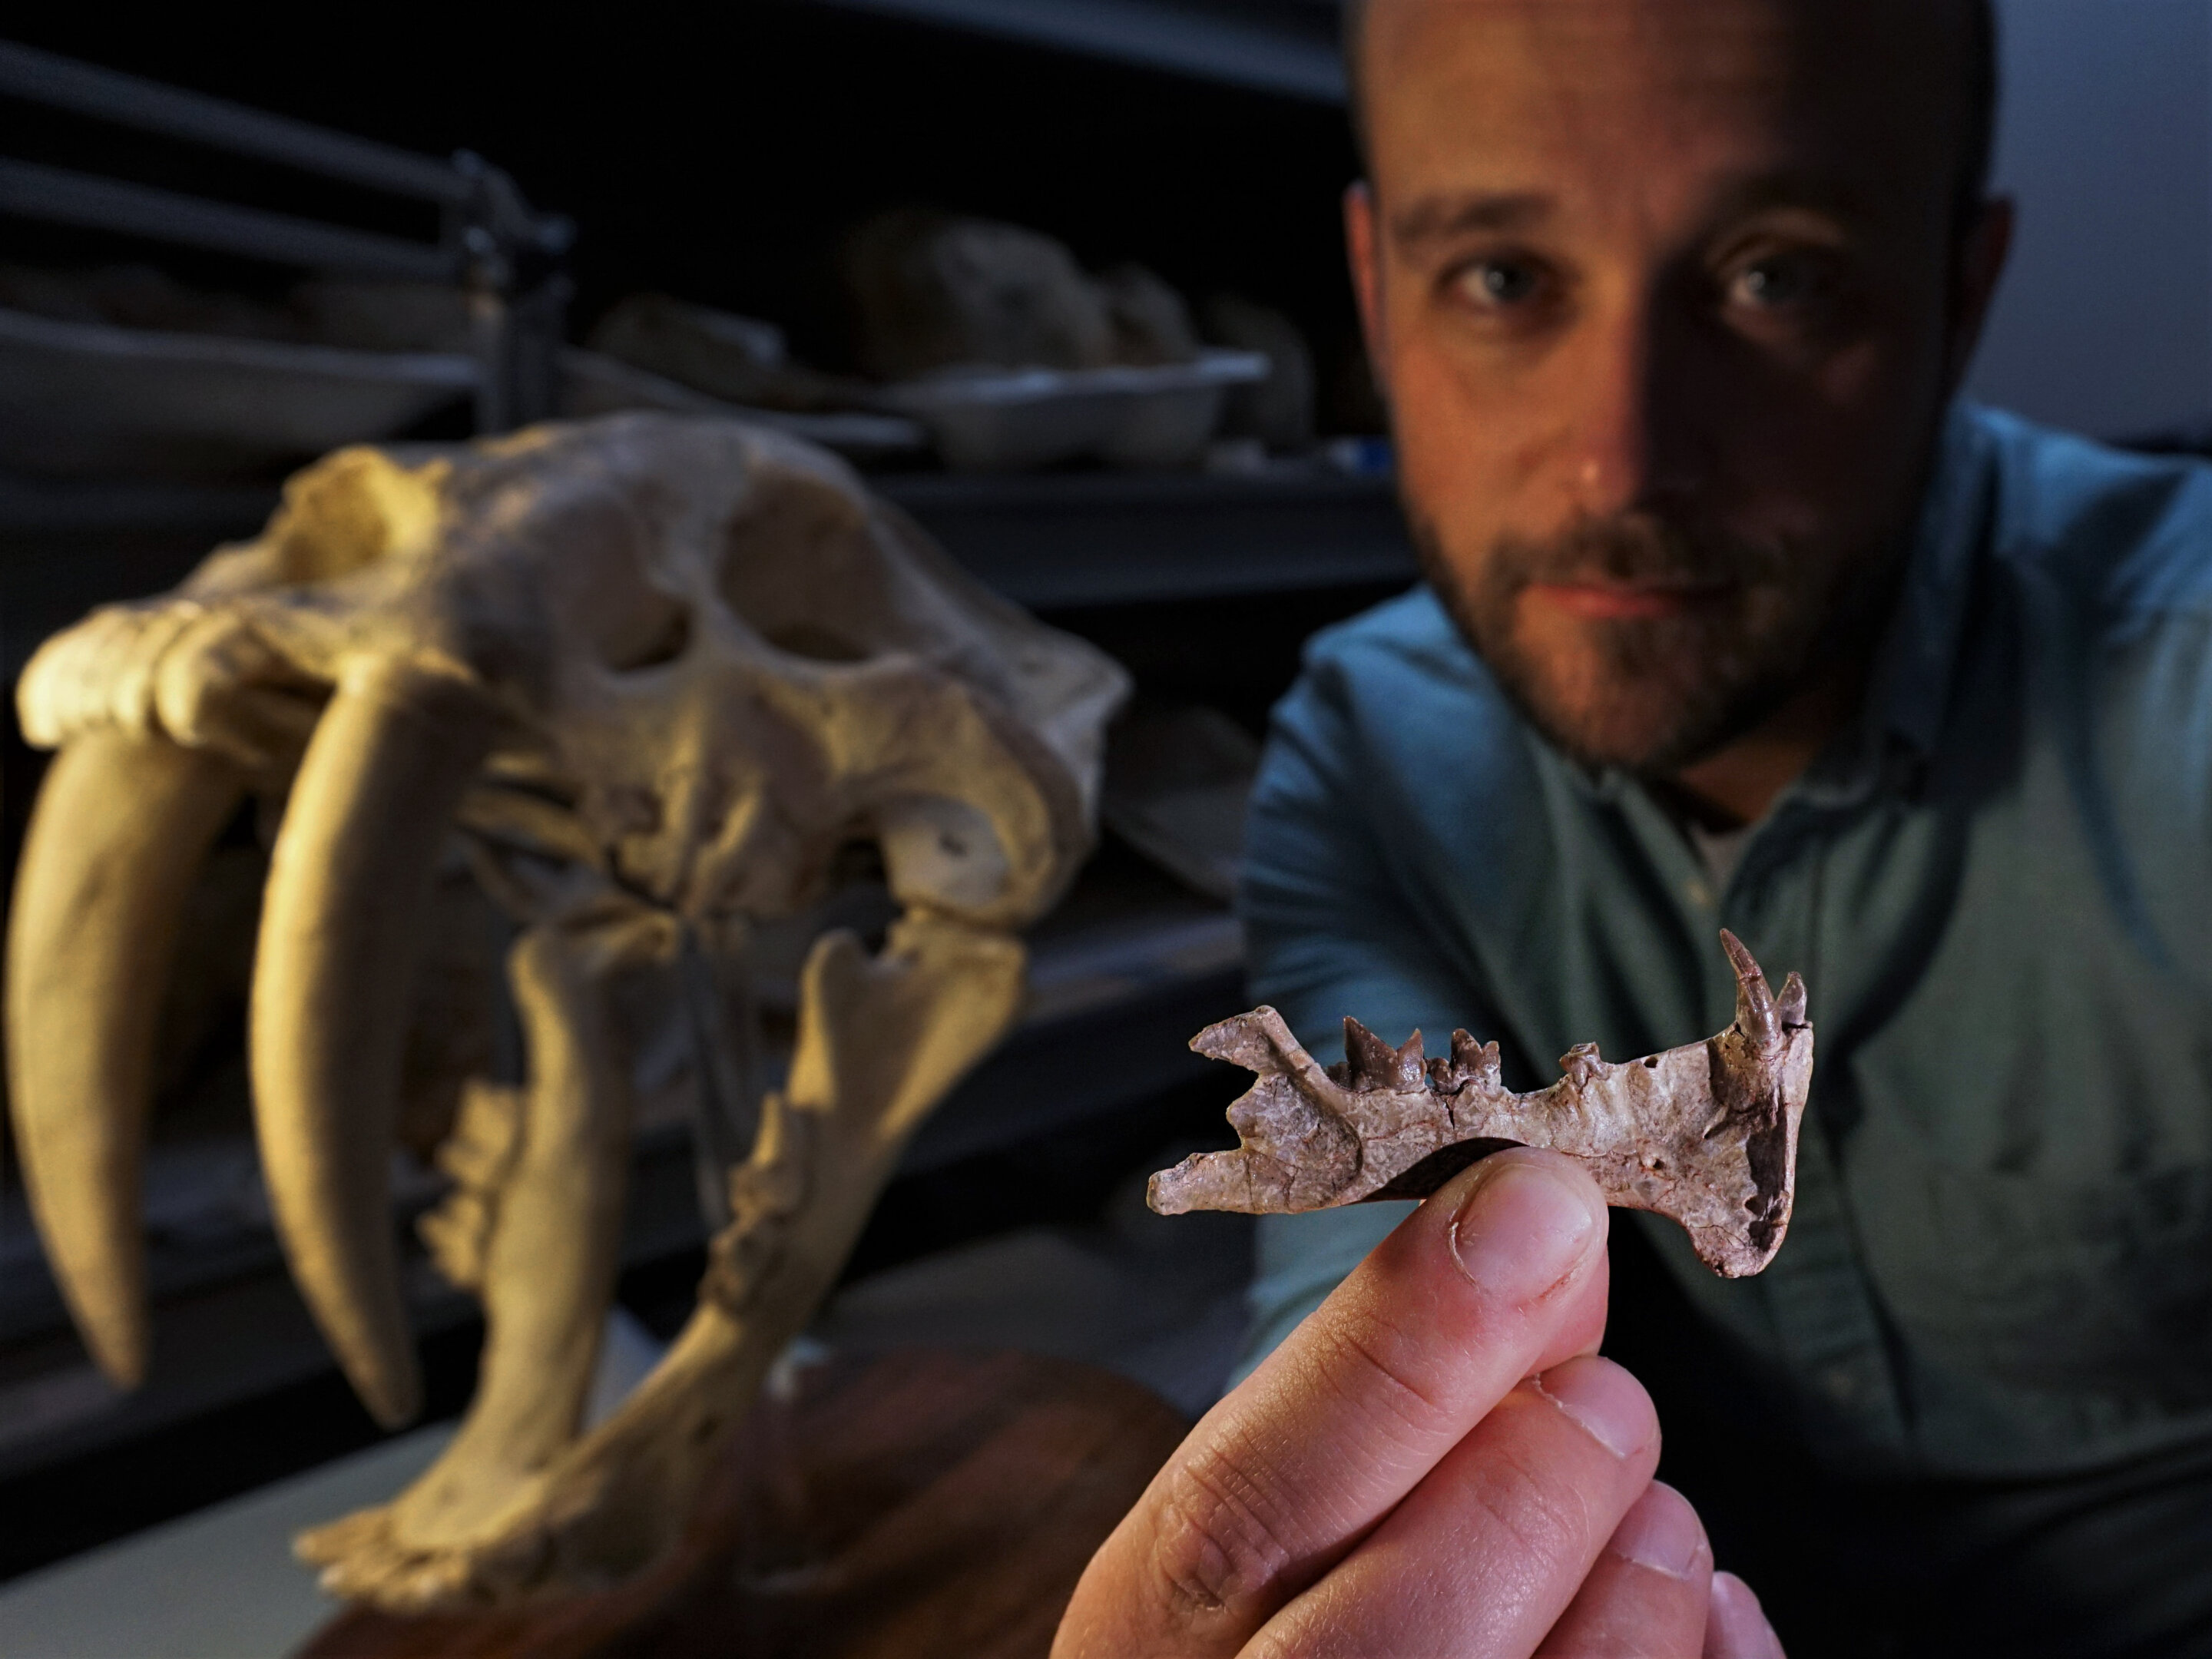 New sabre-tooth predator precedes cats by millions of years